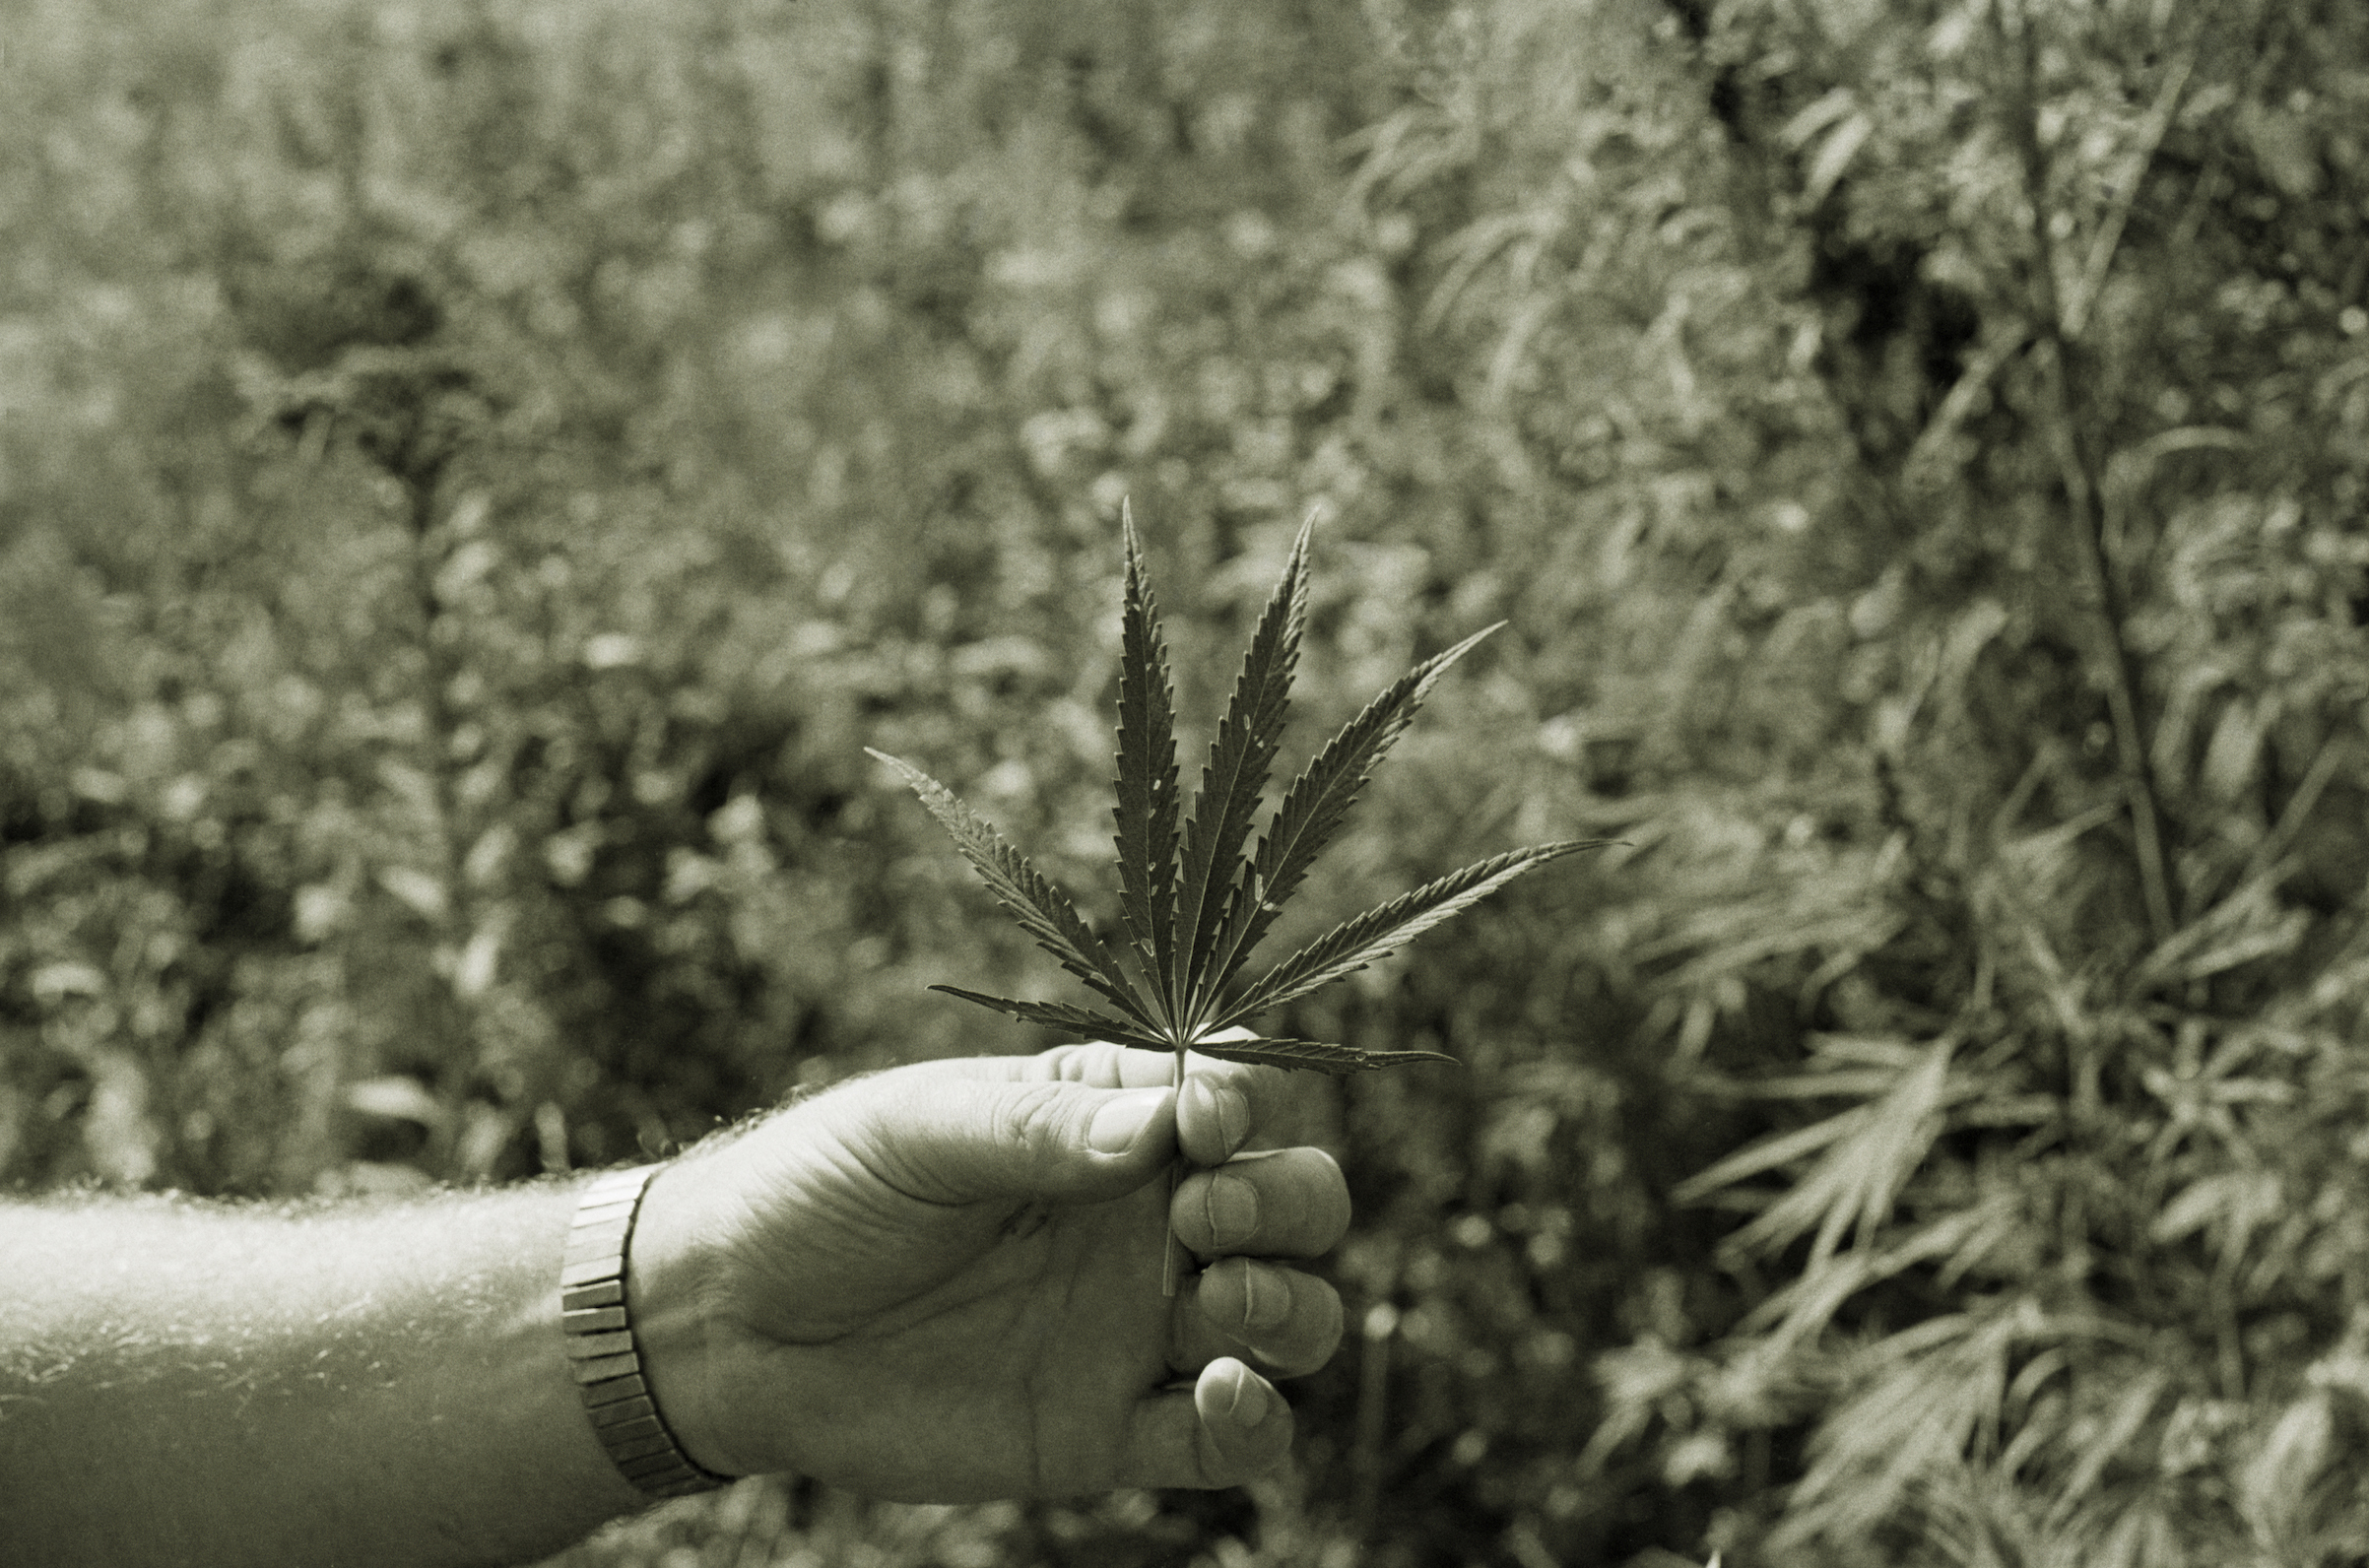 A section of leaves from a wild marijuana plant is held up for close inspection in a field west of Kearney, Neb., in 1973. (Bettmann/Getty Images)